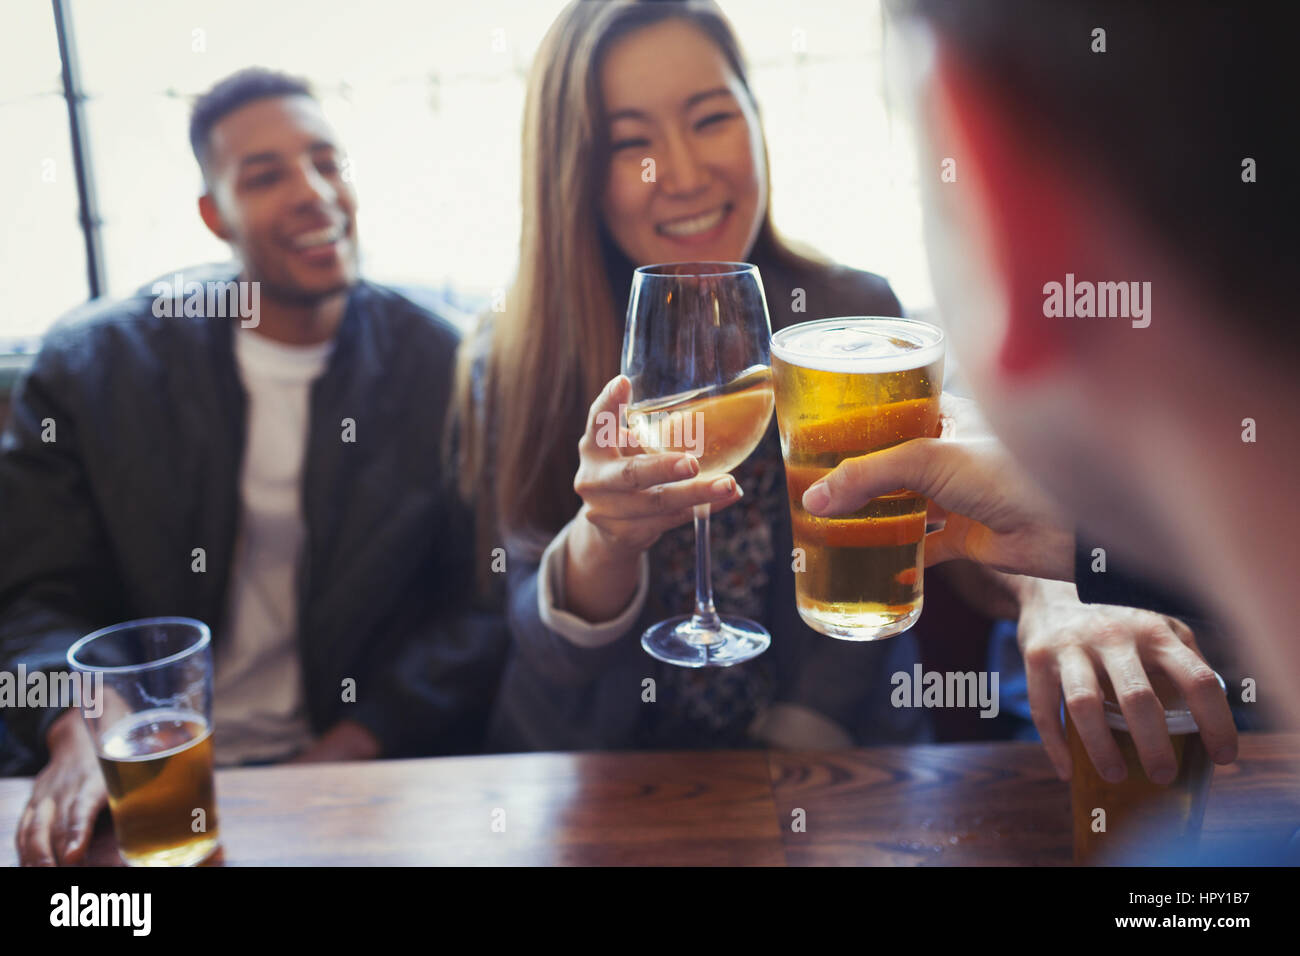 Friends celebrating, toasting beer and wine at table in bar Stock Photo